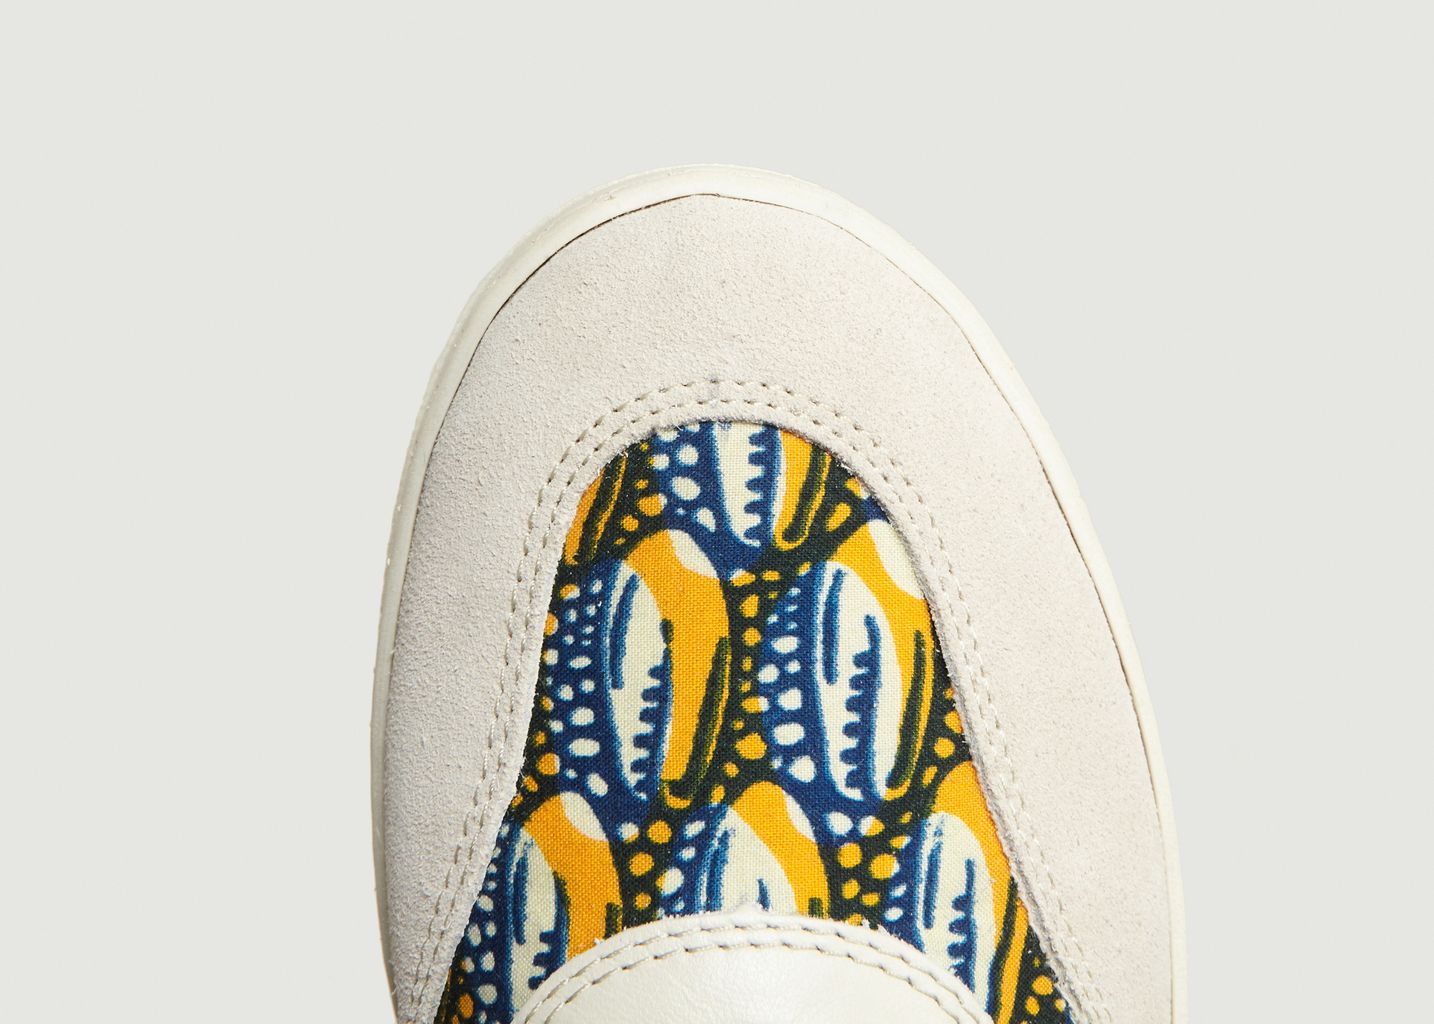 Shara Low Top Trainers - Panafrica